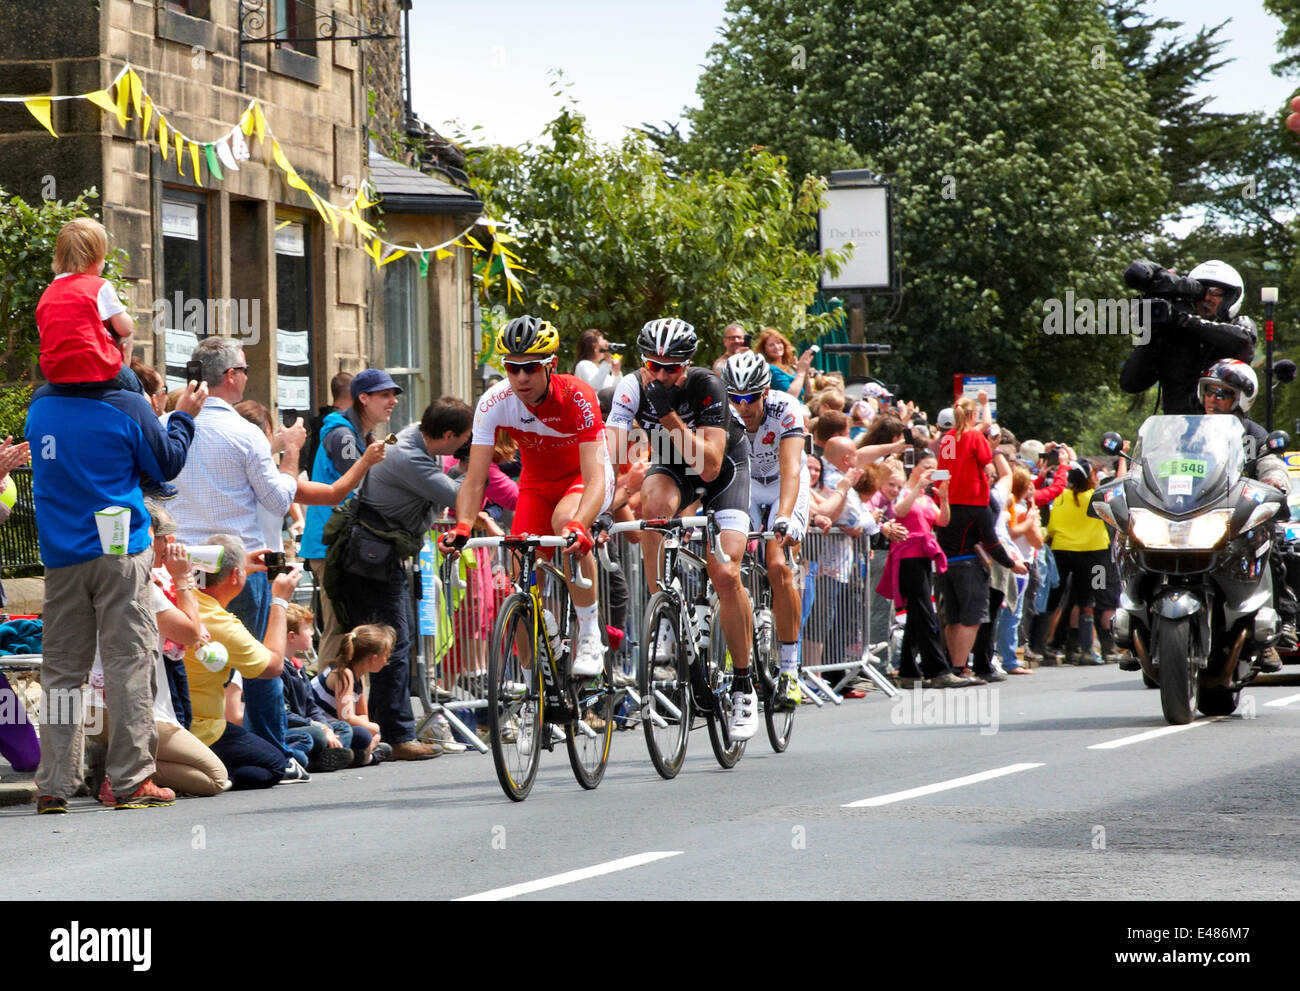 Addingham, Yorkshire. July 5th 2014. Cyclists led by Nicolas Edet of France, in the First Stage of the Tour de France pass through the Yorkshire village of Addingham, with cheering crowds and sunshine. Credit:  Christina Bollen/Alamy Live News Stock Photo